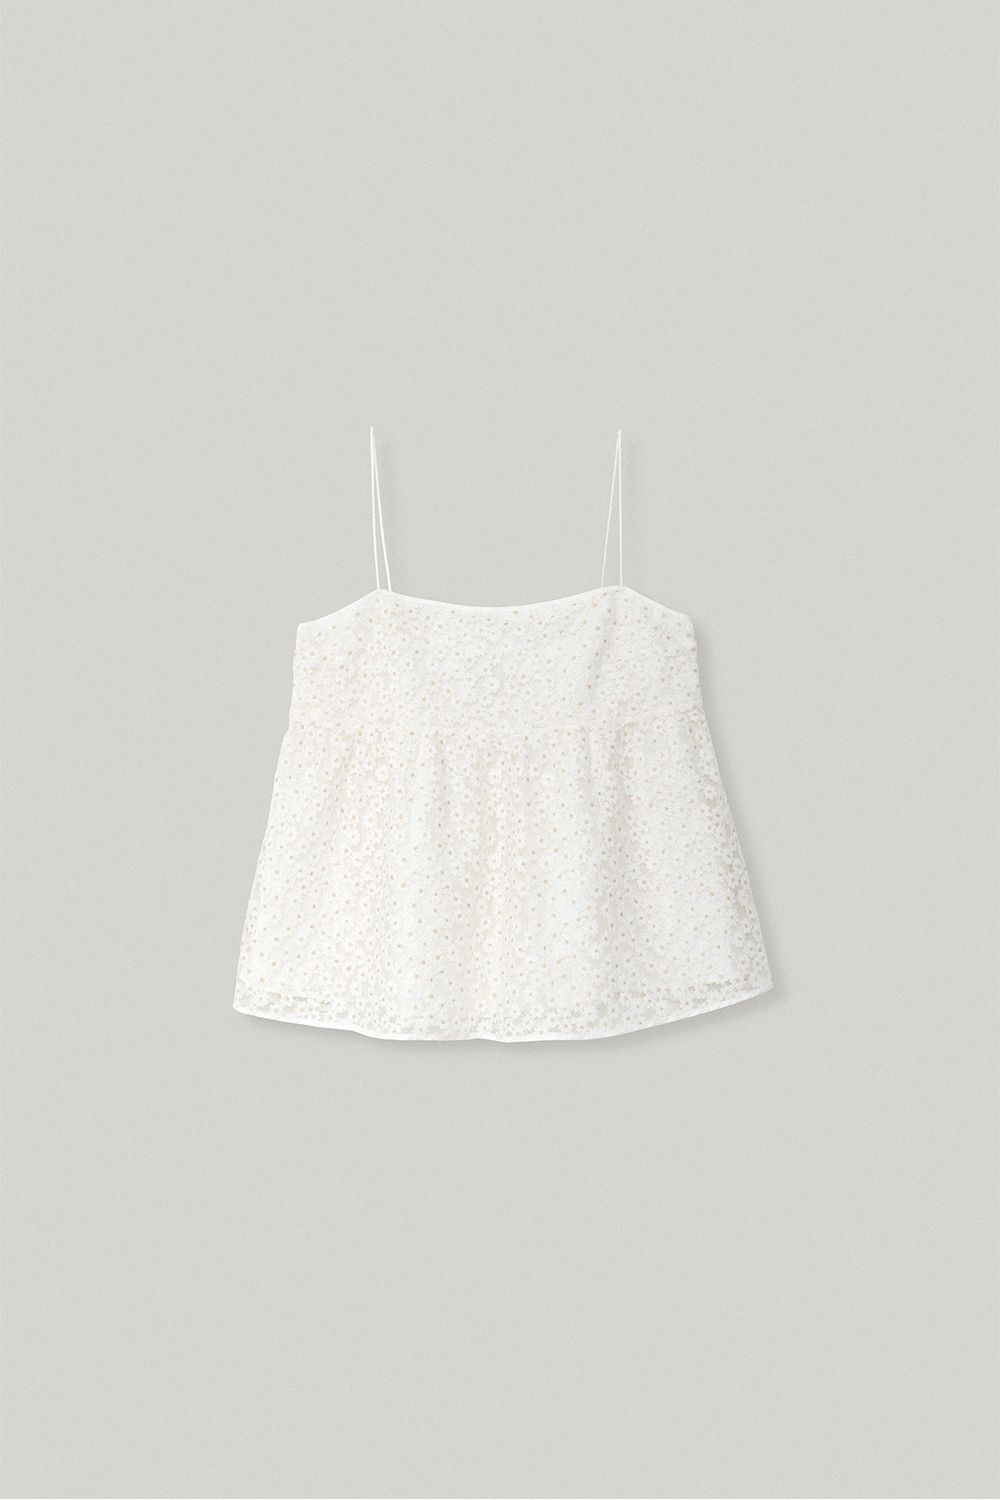 [4 REORDER] Ivy Embroidery Top in White